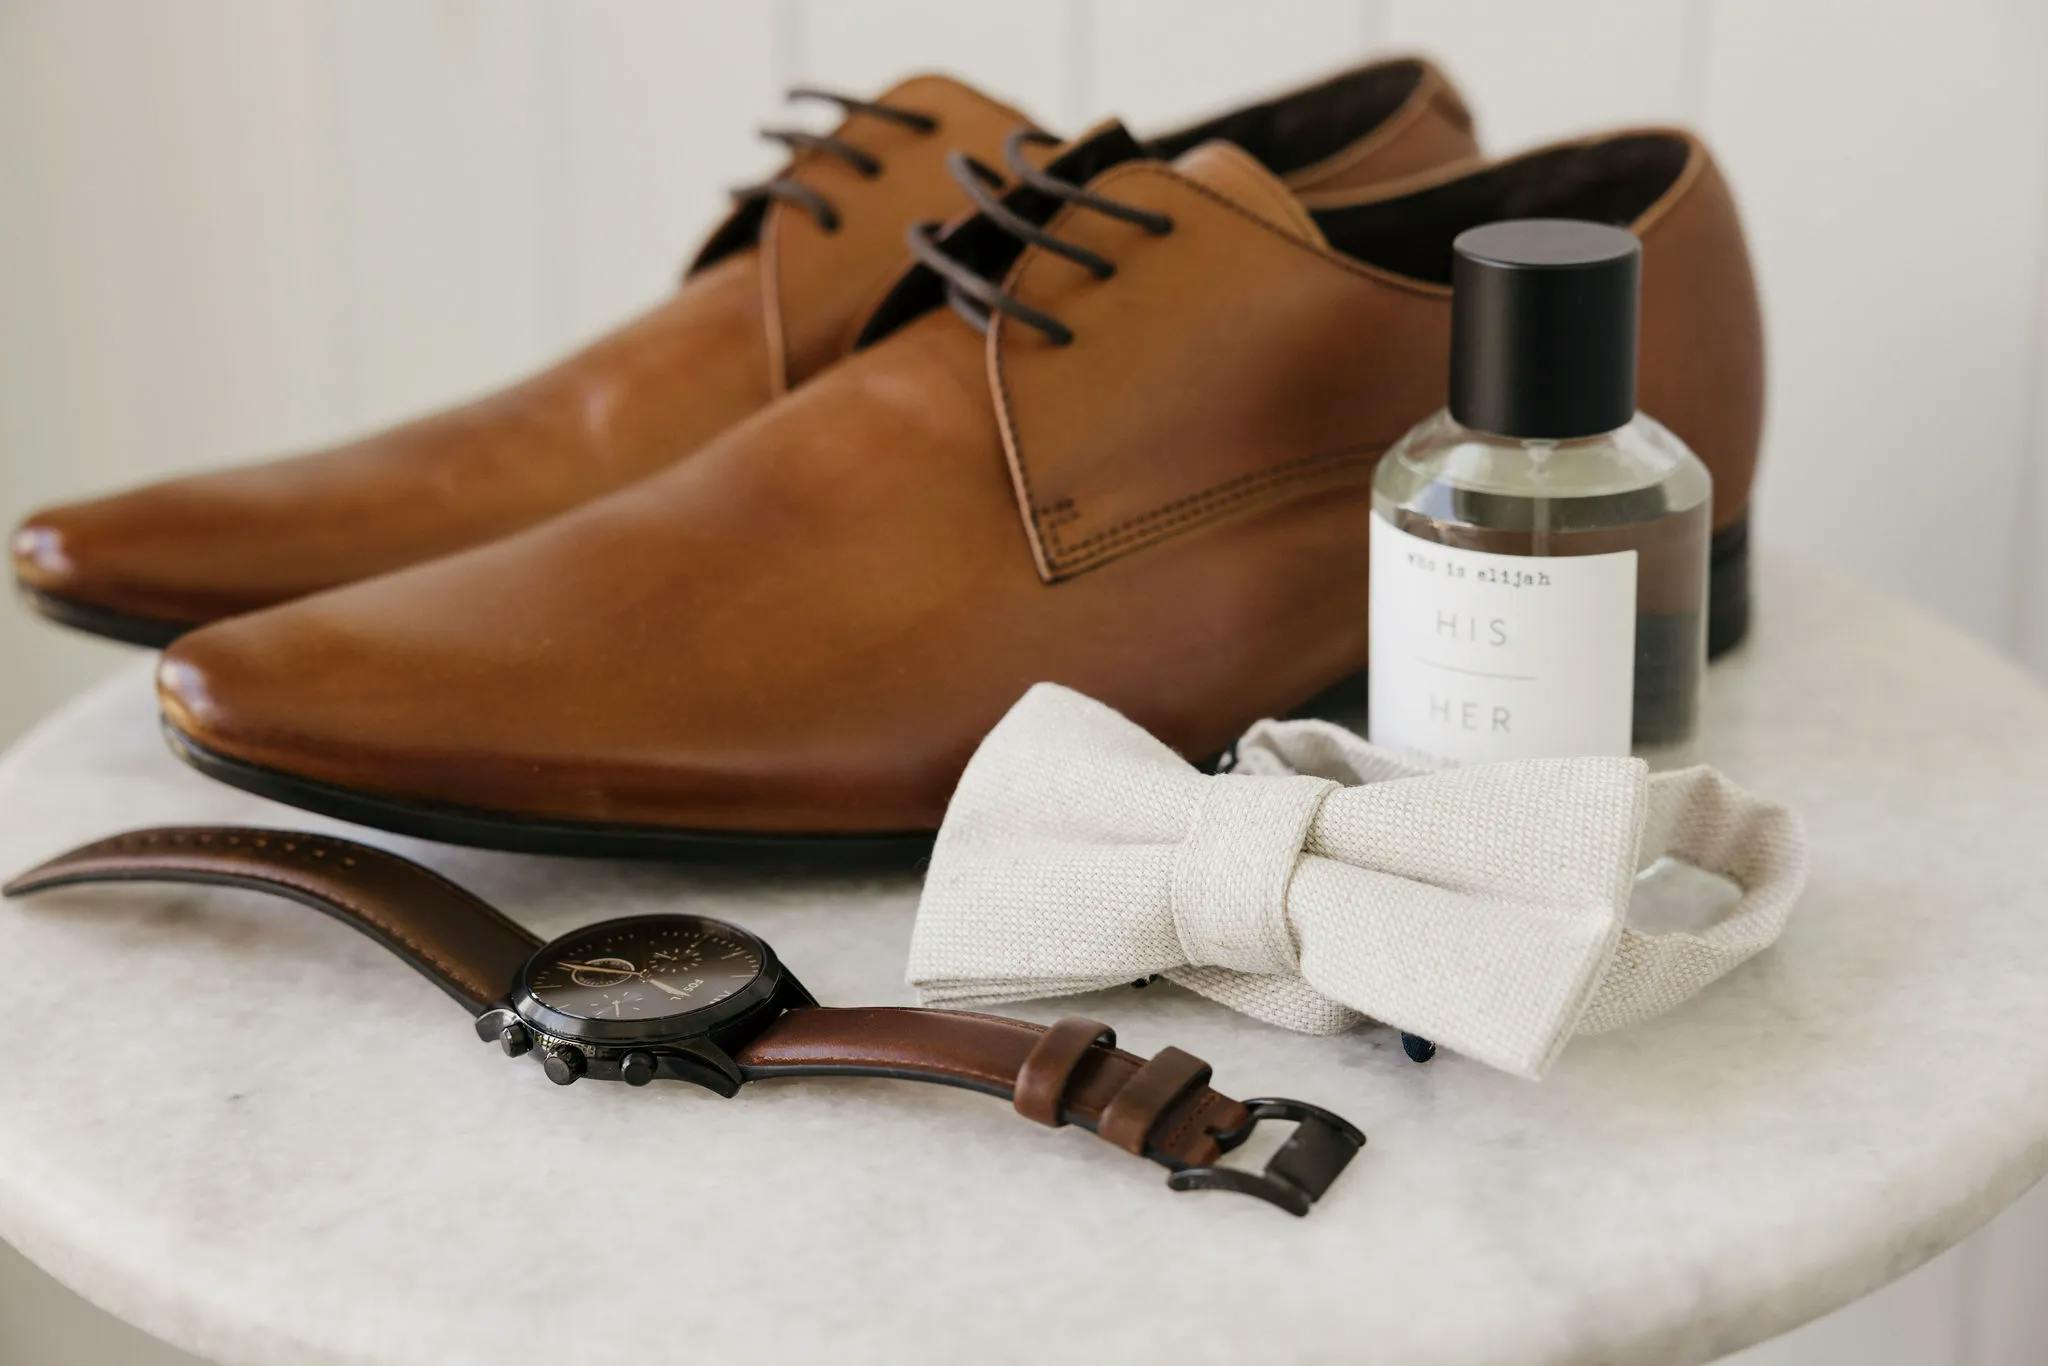 Groomsmen shoes, watch and cologne